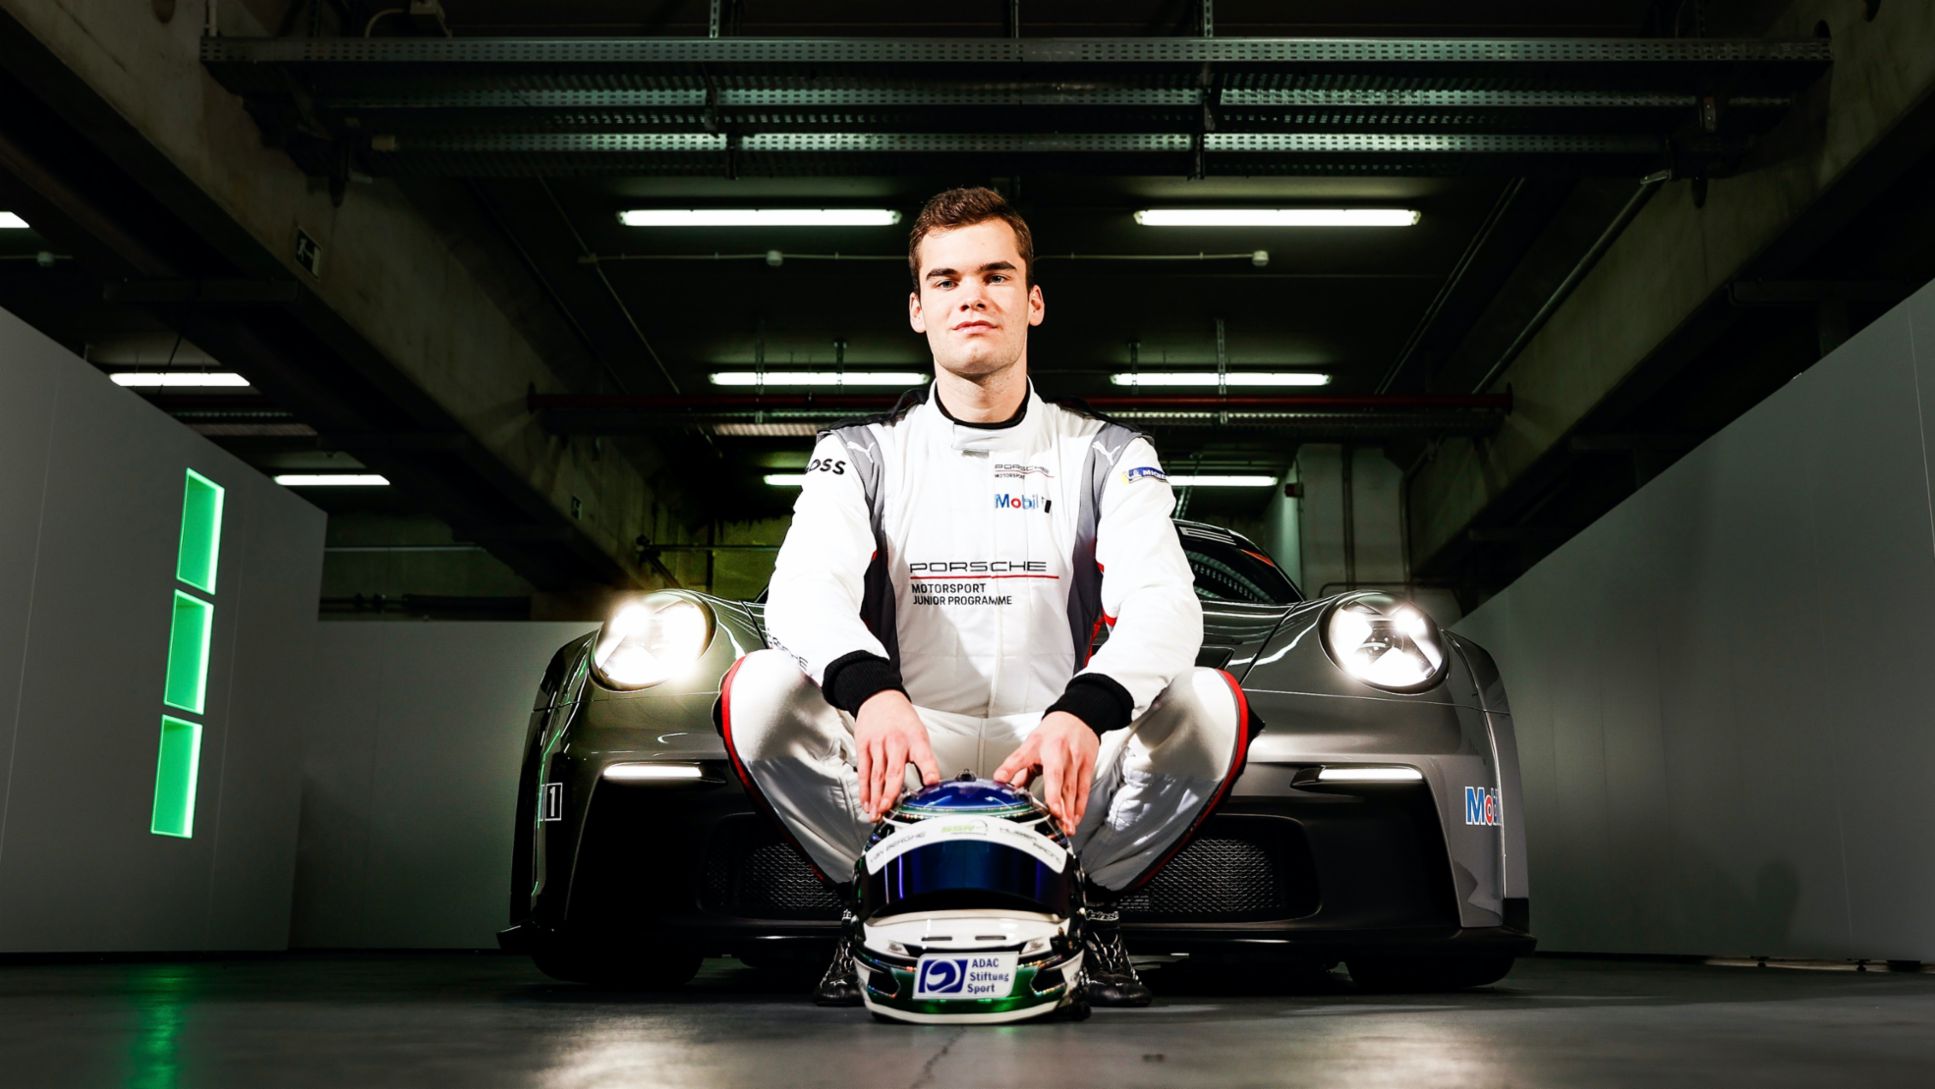 Laurin Heinrich named Porsche Junior and receives comprehensive support - Image 1